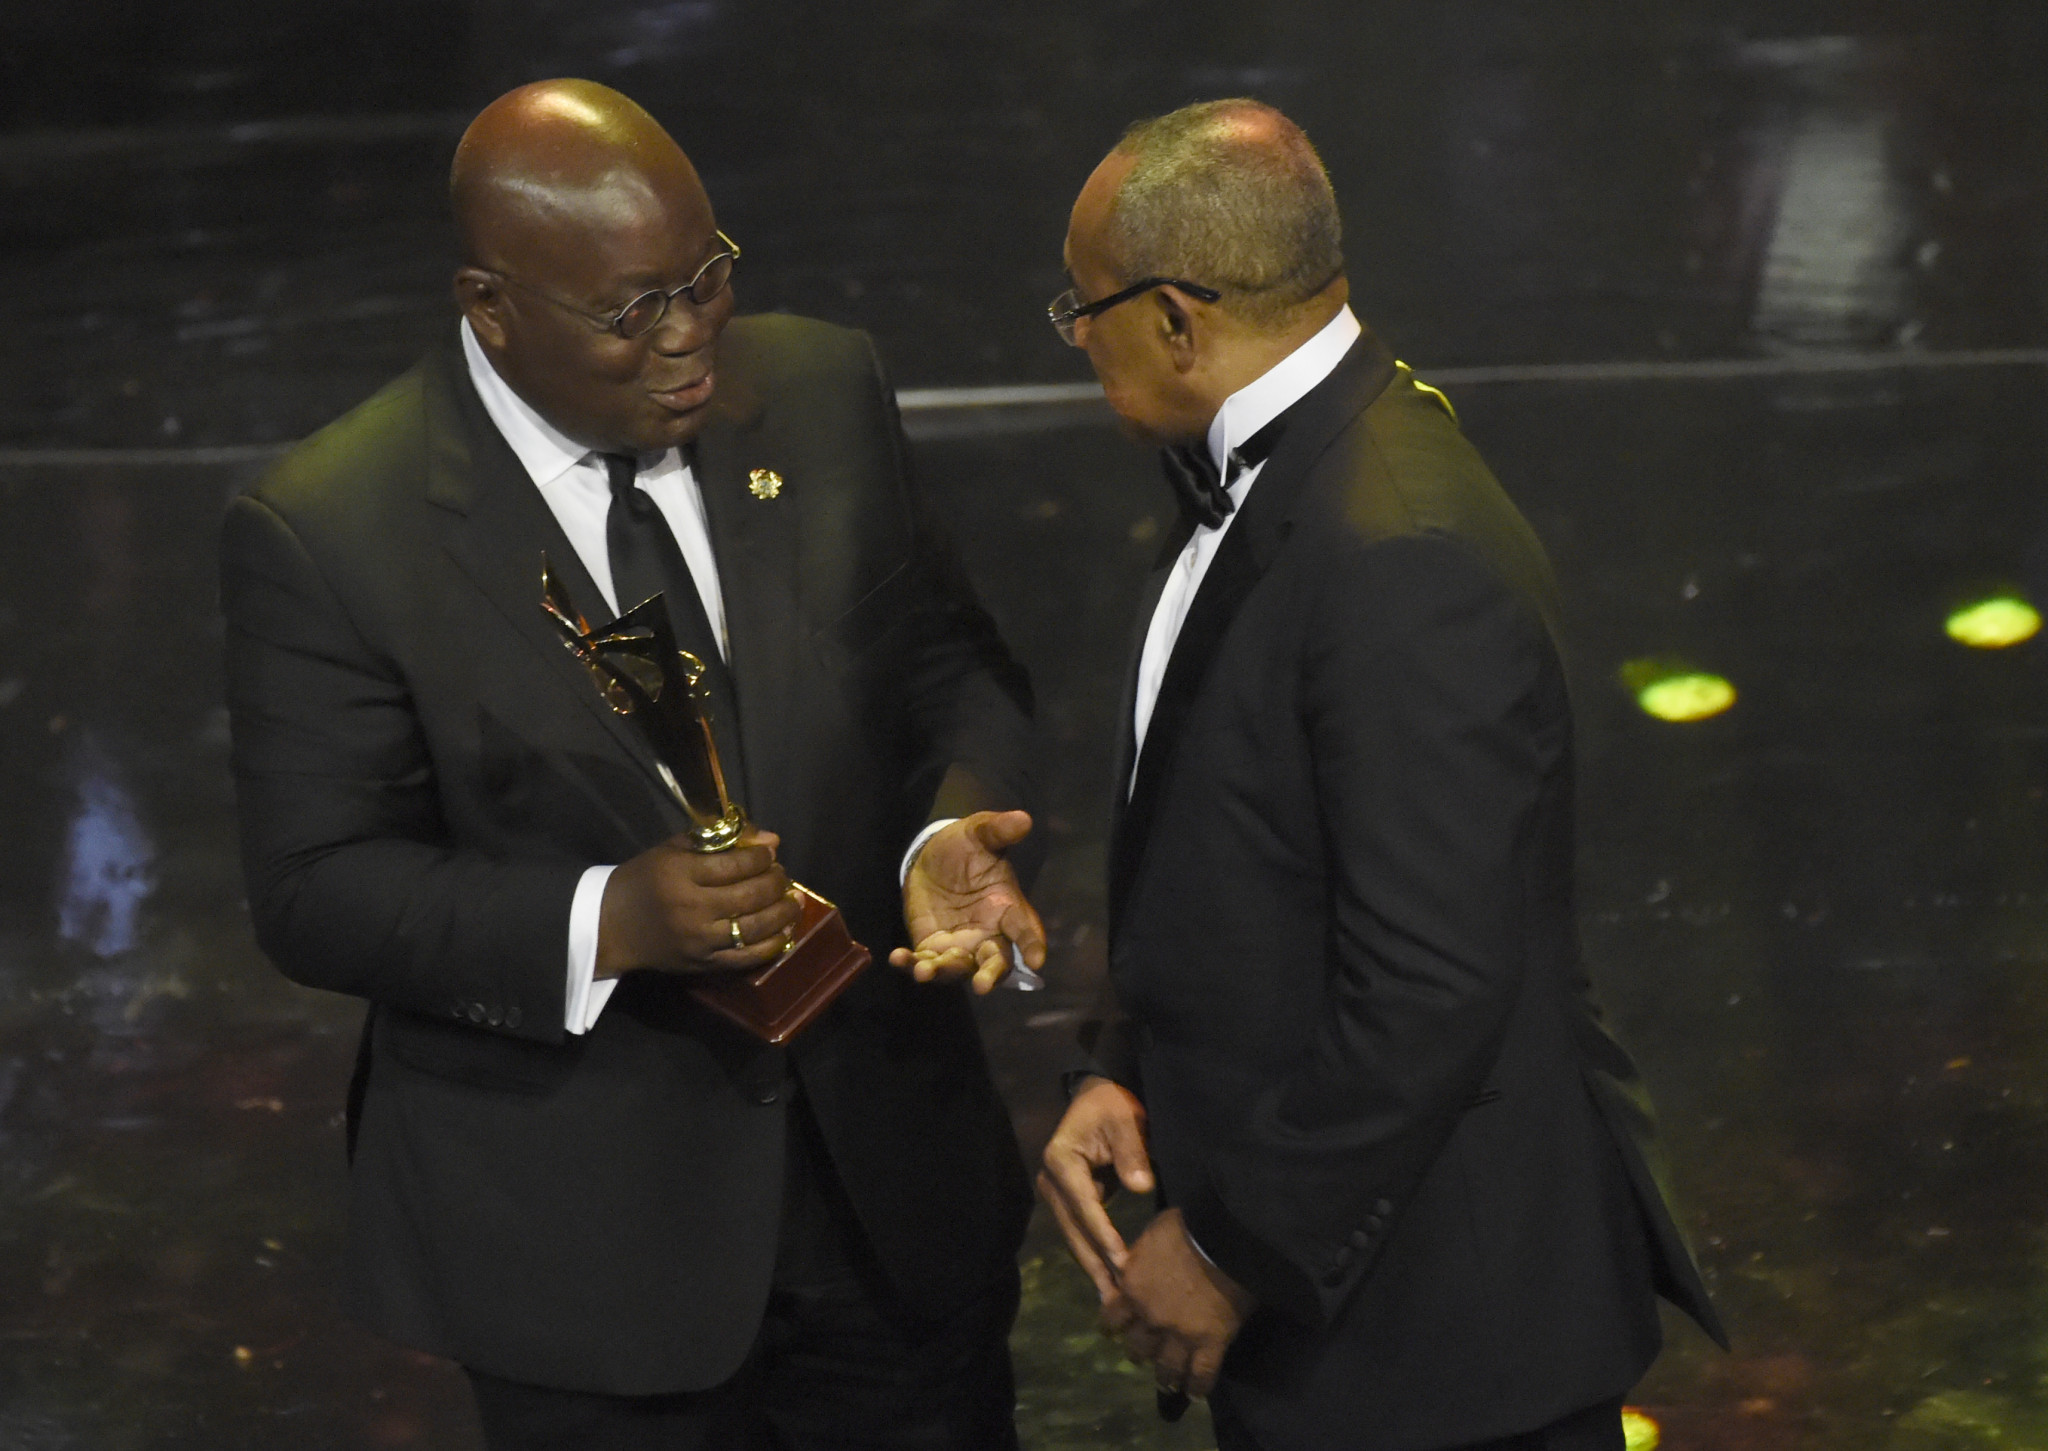 President Nana Addo Dankwa Akufo-Addo, left, has directed the University of Sport for Development to be formed through a transformation of the facilities that will be used for the Games at Borteyman ©Getty Images